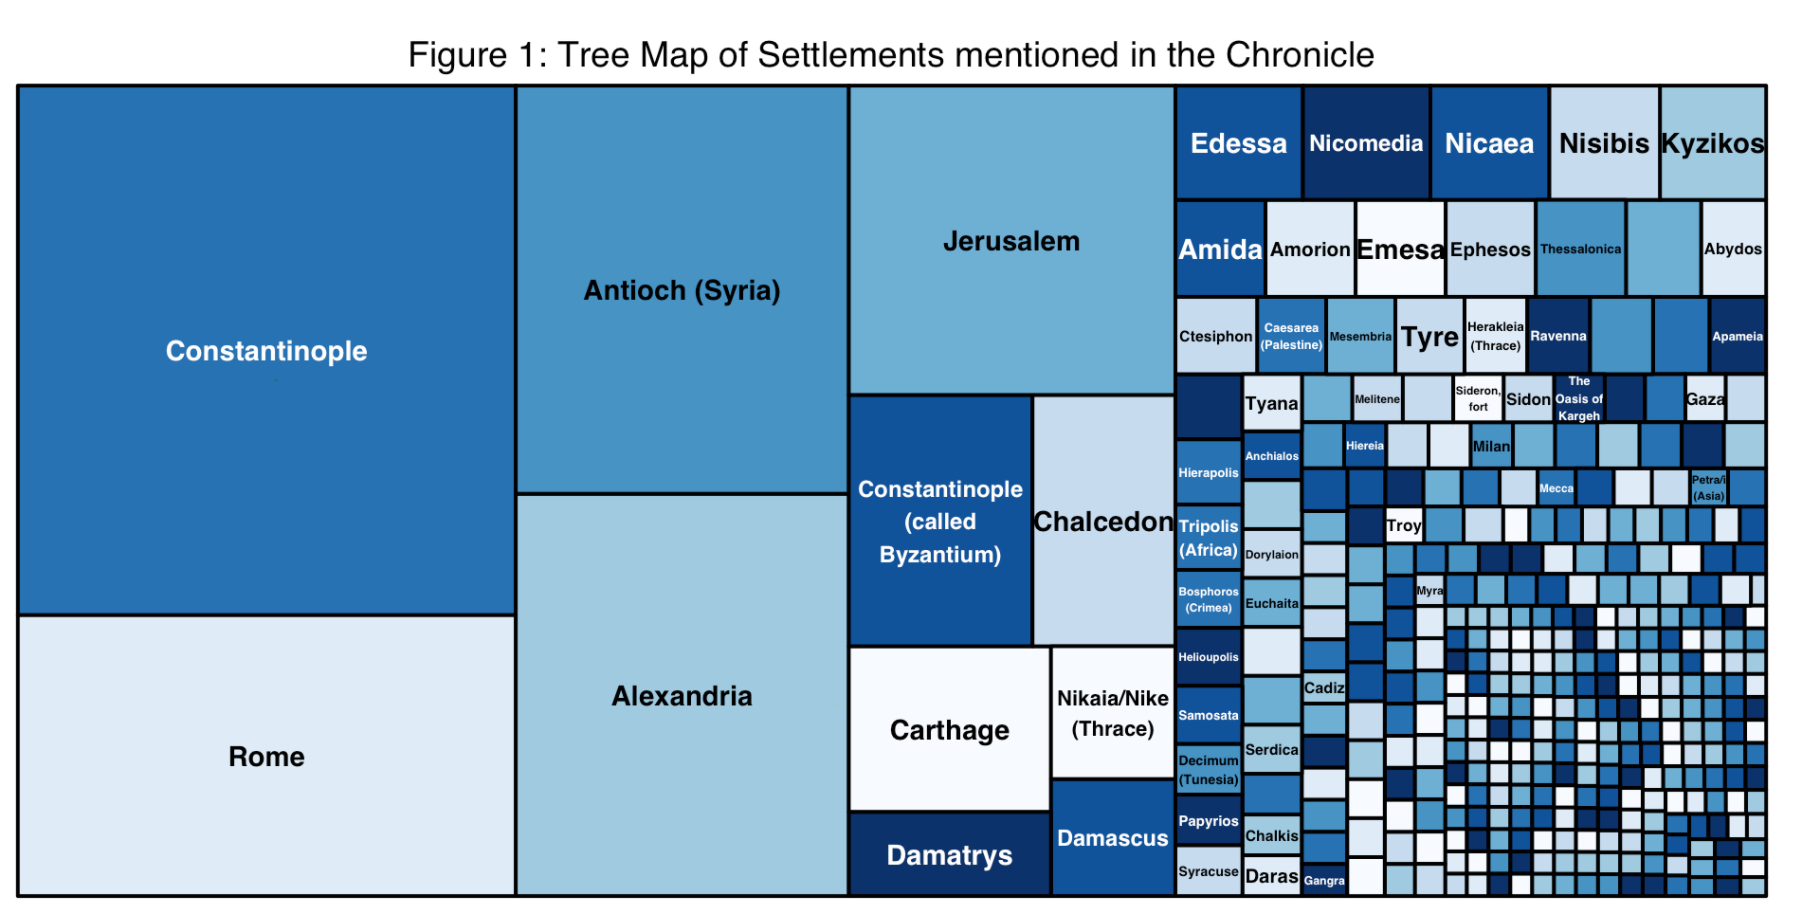 Figure 1: Tree Map of Settlements mentioned in the Chronicle